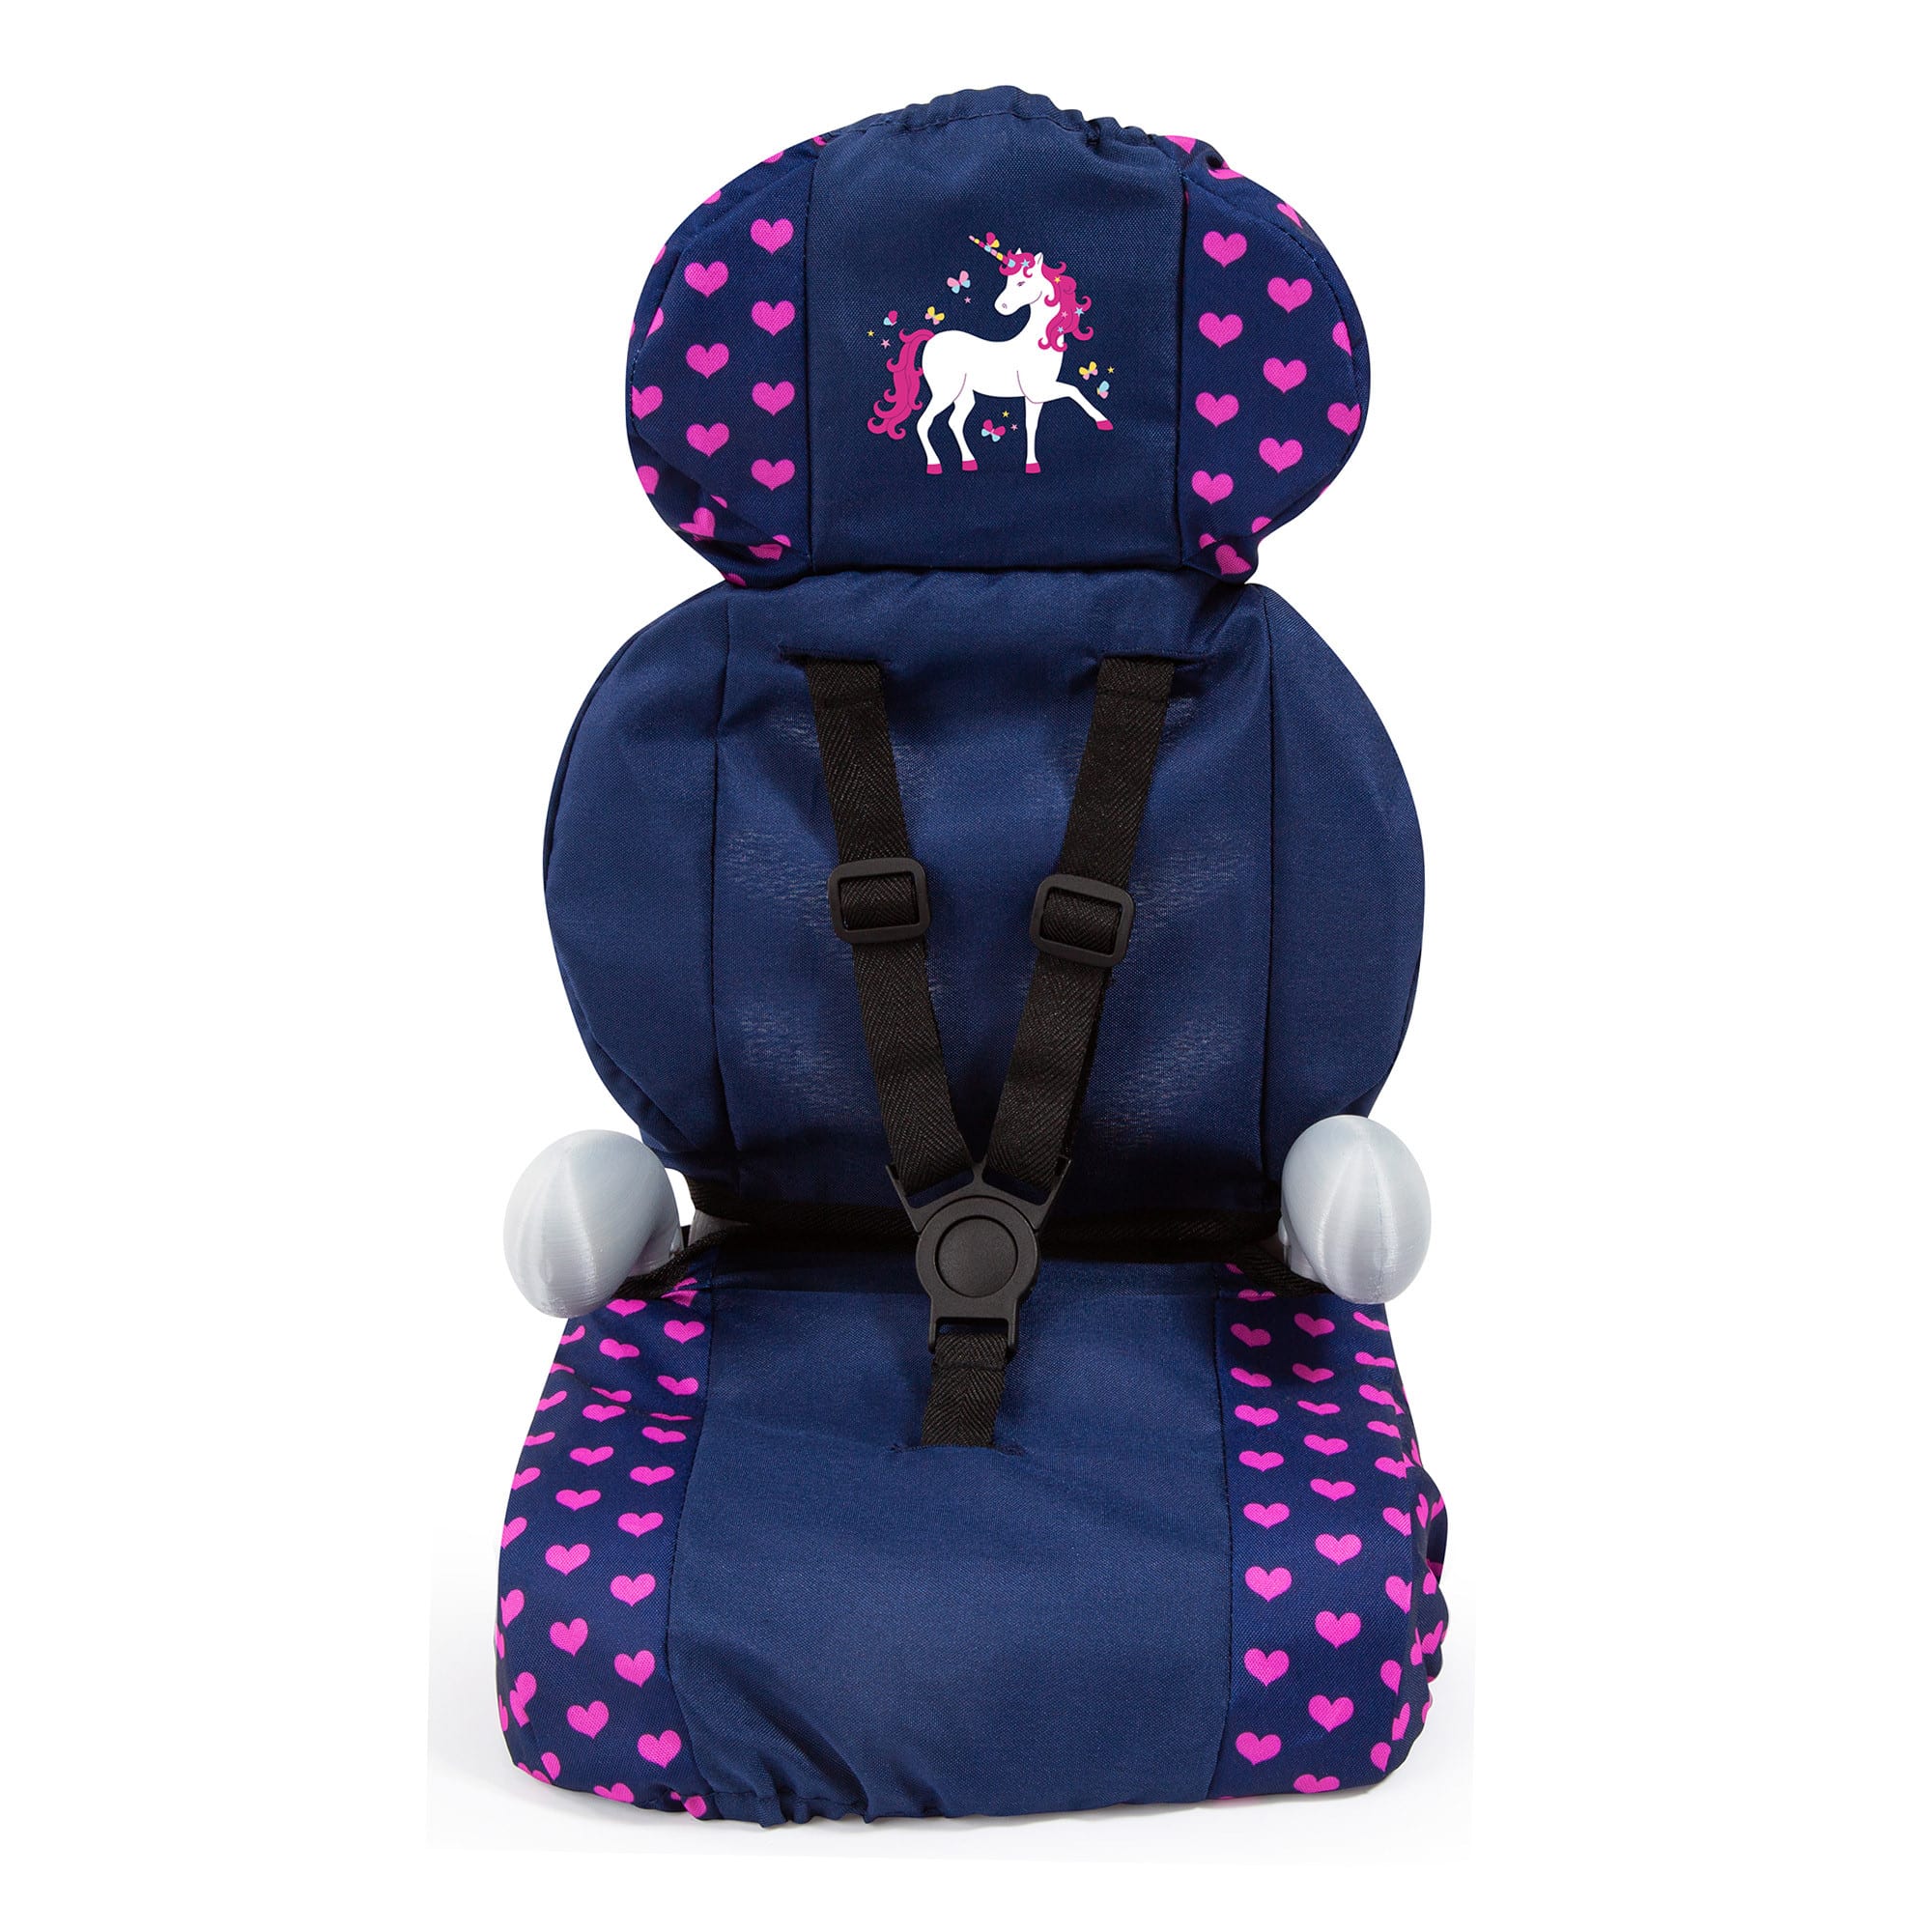 Bayer Deluxe Doll Booster Seat - Blue with Pink Hearts & Unicorn